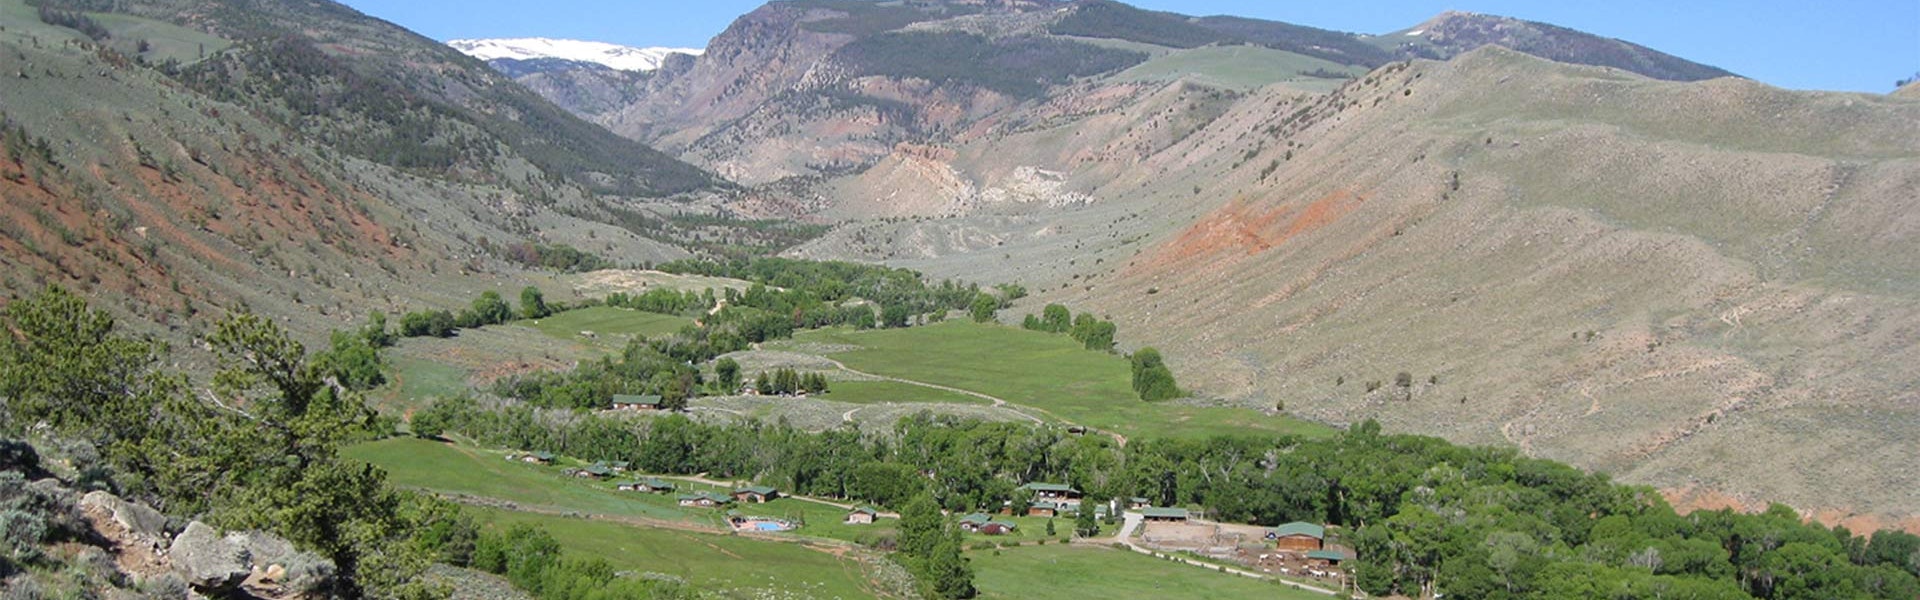 Aerial view of the C.M. Ranch